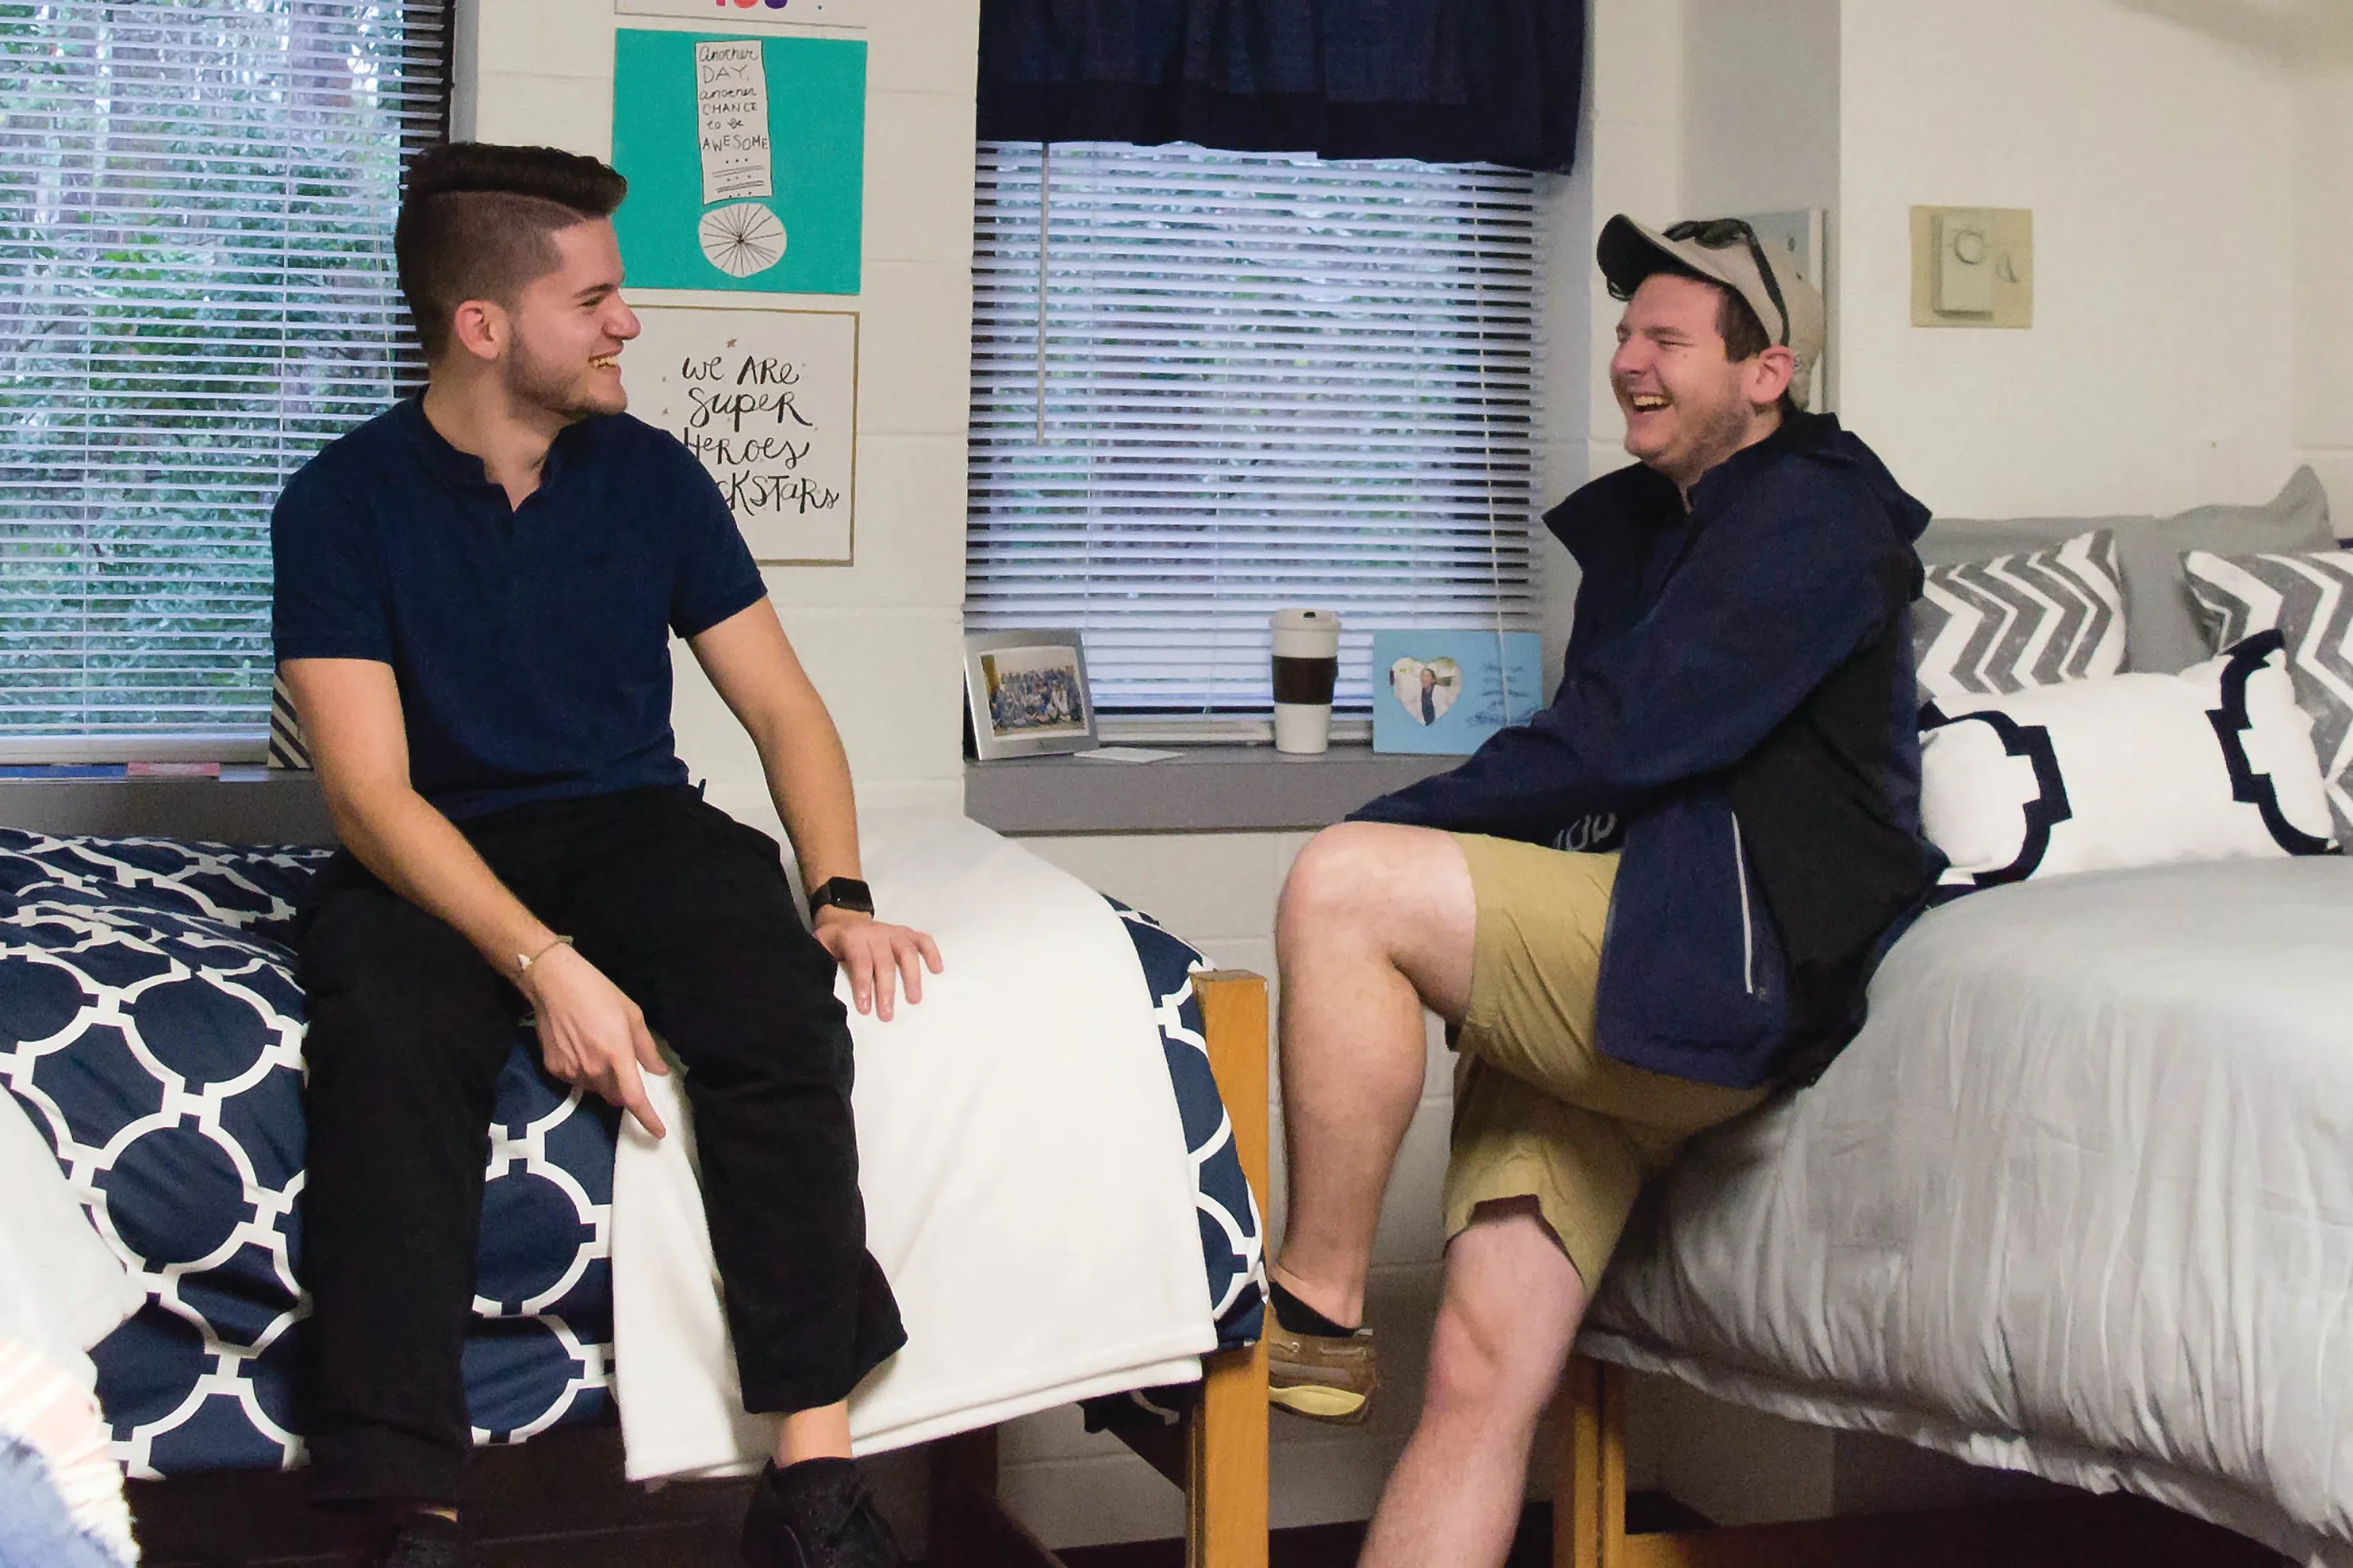 Students sitting on beds and laughing in first-year decorated room